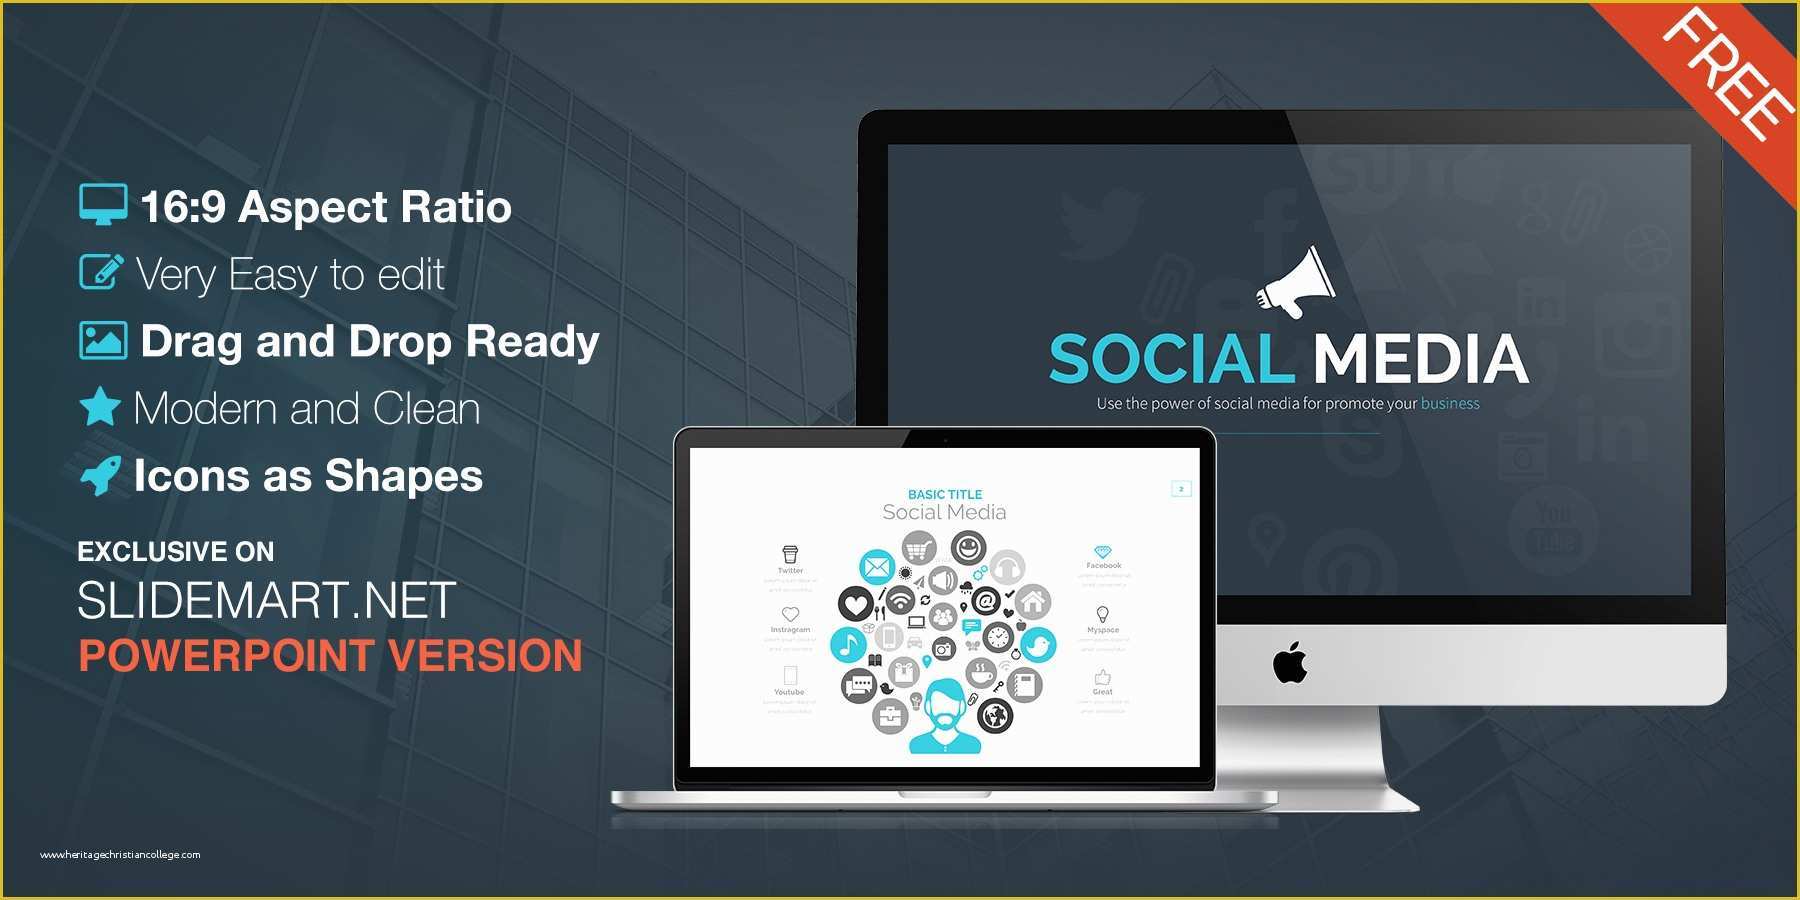 Free social Media Design Templates Of the Best 8 Free Powerpoint Templates